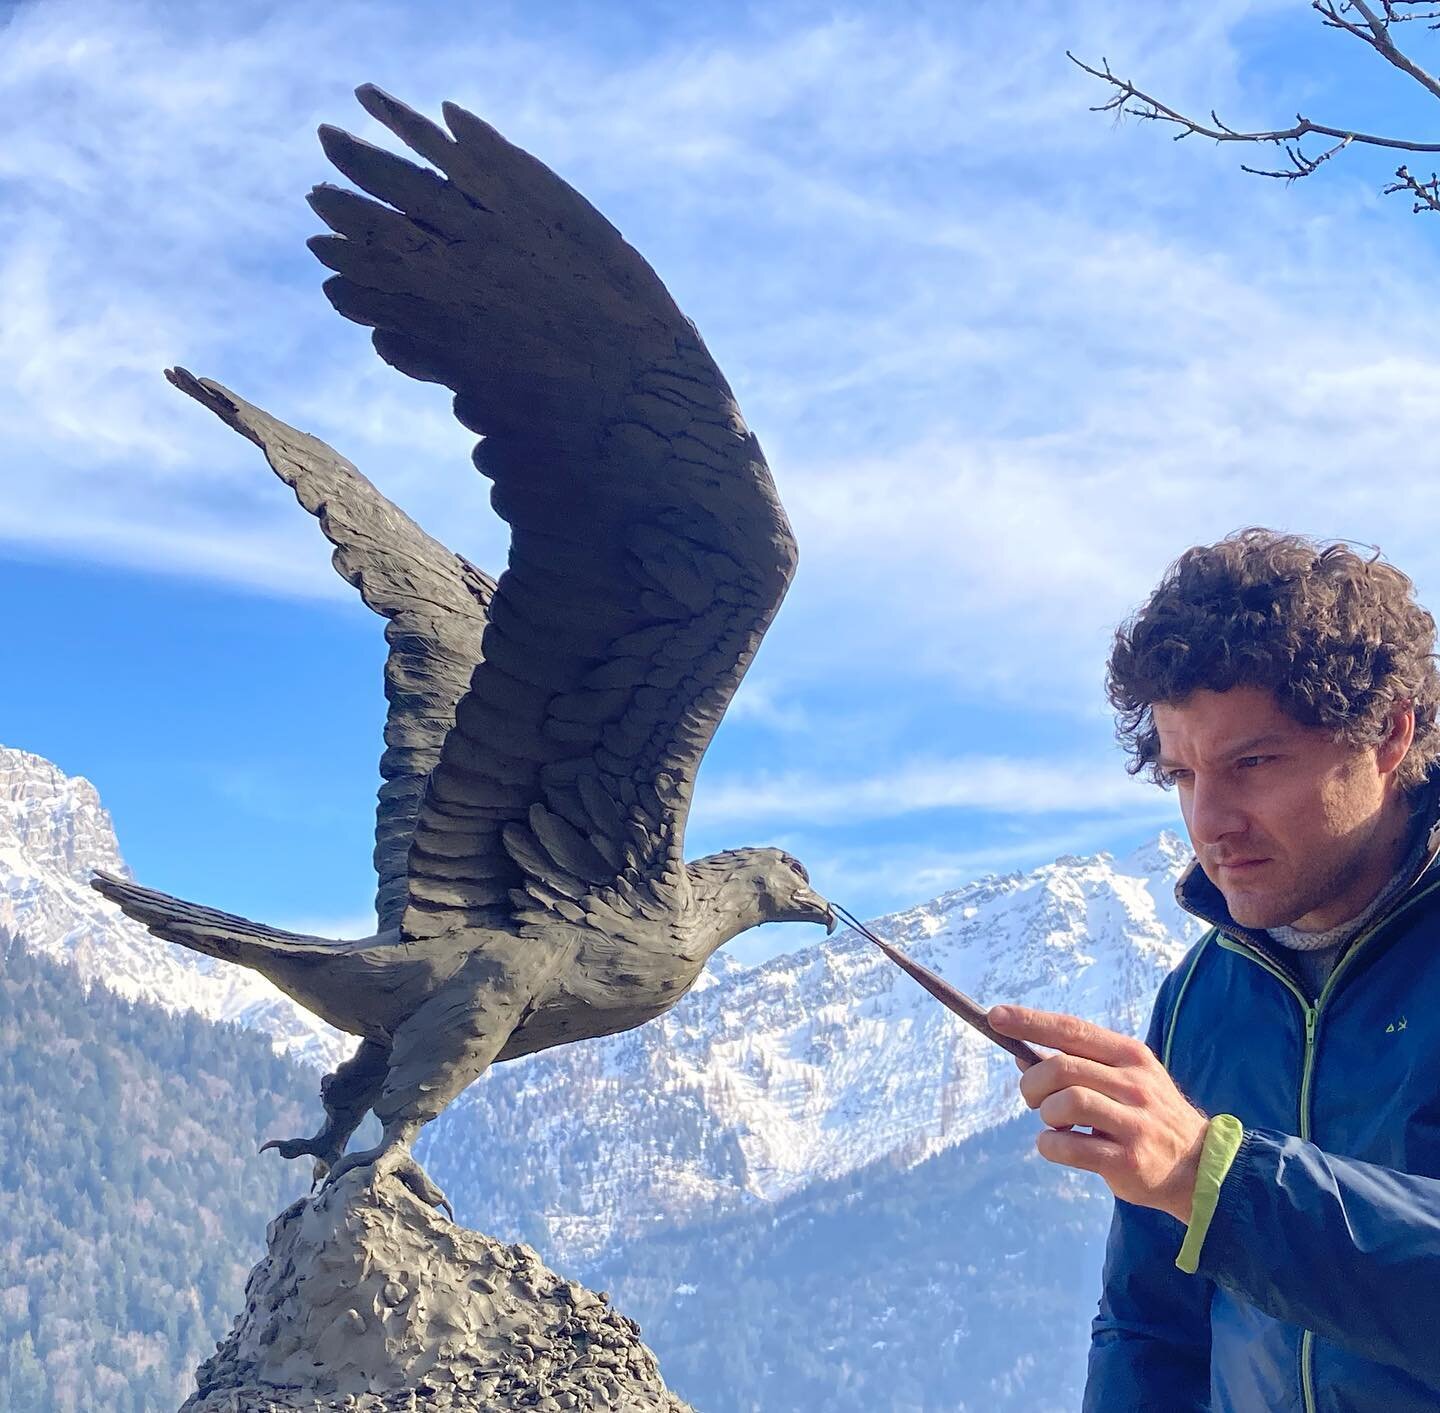 Sculpting surrounded by mountains and nature🏔🌲🦅❄️
.
.
#art #artist #birds #eagle #goldeneagle #aquilareale #sculpture  #wildlifesculpture #bronzesculpture #alpinelife #chalet #luxurydecor #gardendesign #homedesign #homedecor #contemporaryart #fine